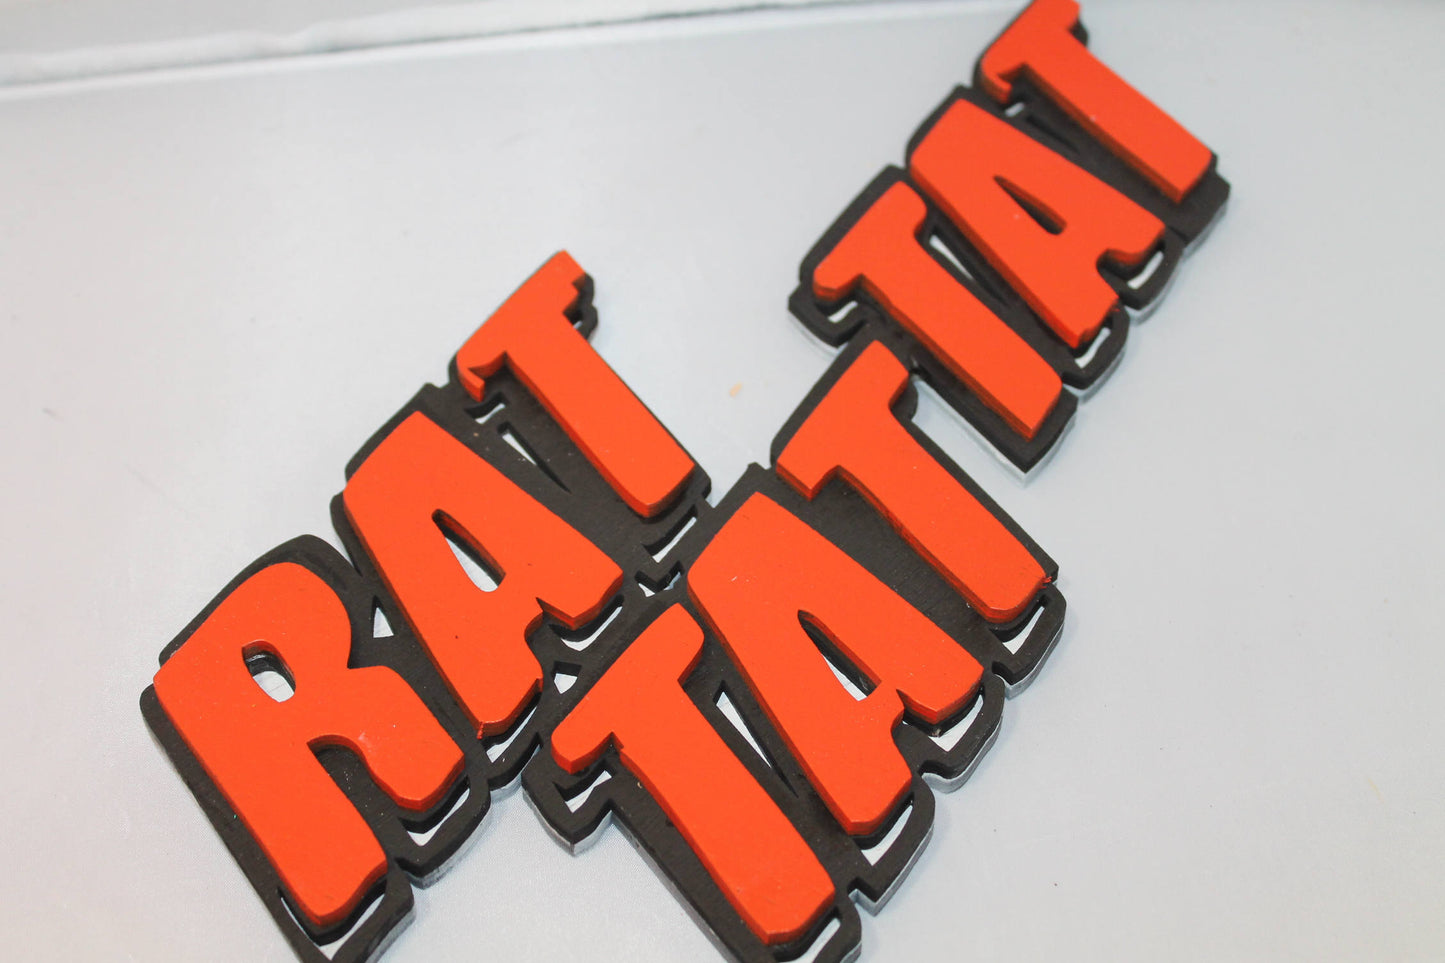 Rat Tat Tat, Comic Book Word of Action, Sound Effect, Super Hero, Sign, Wooden Words, Laser Cut Out, Wood Cut Out,Footstepsinthepast